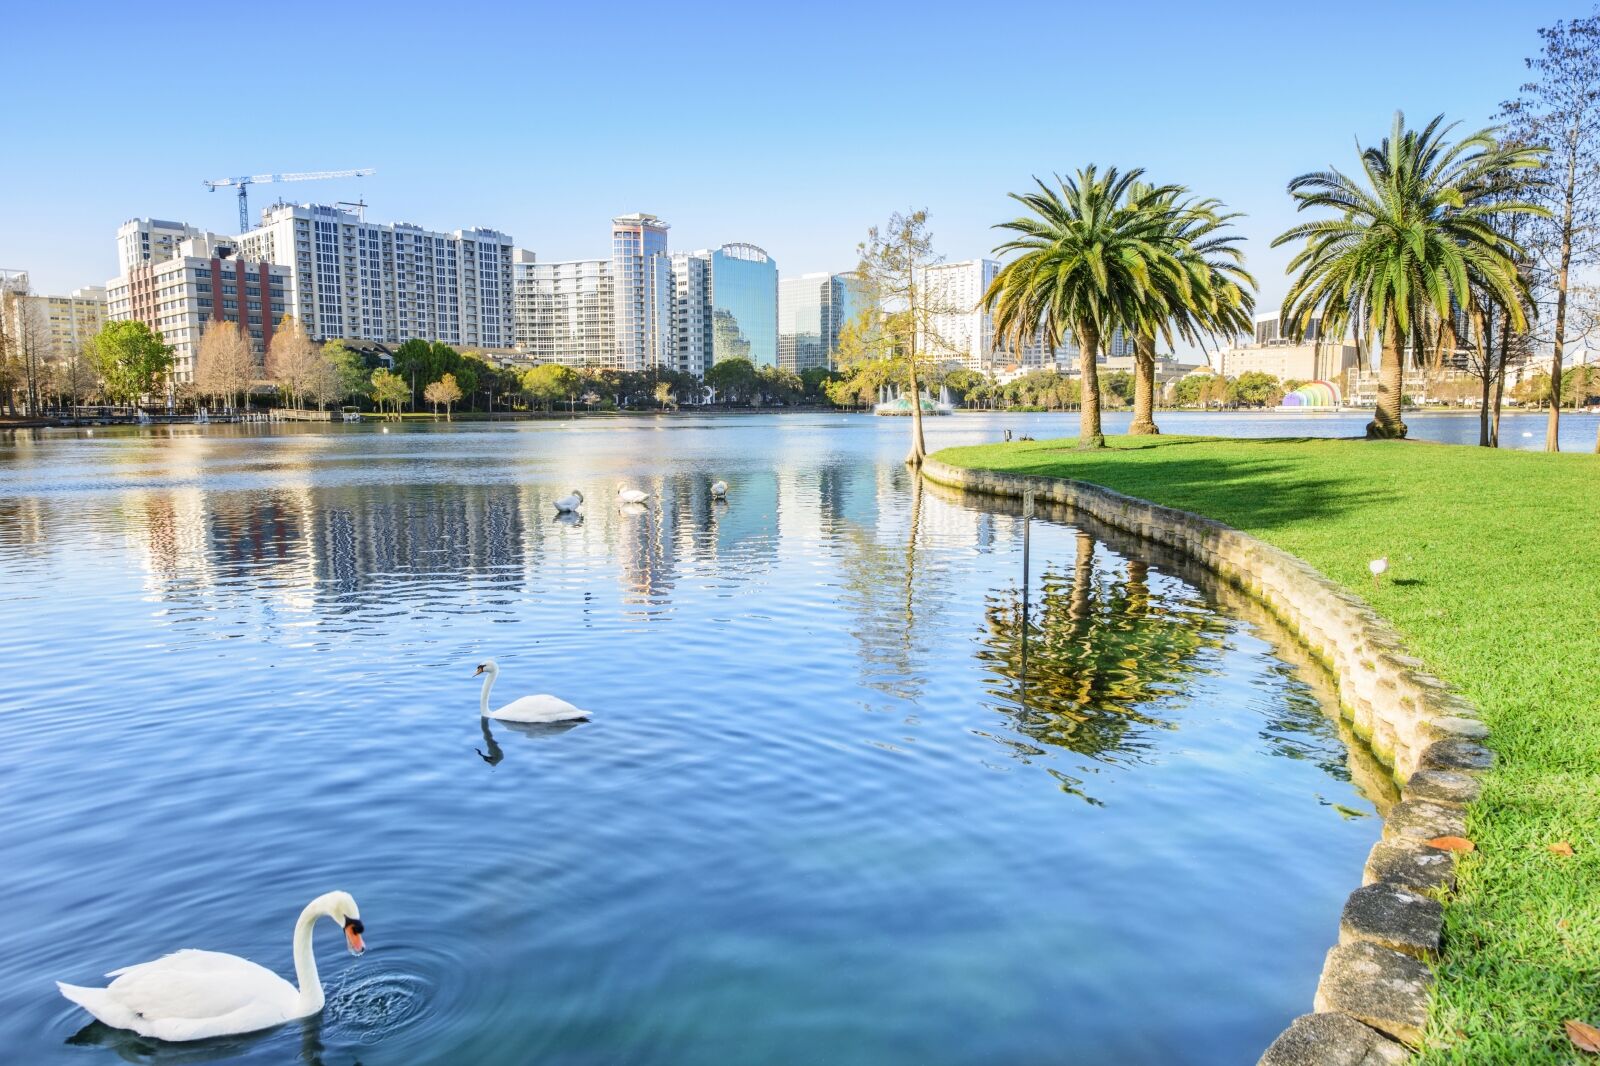 Located in Lake Eola Park, Orlando, Florida. One of the best outdoors things to do in Orlando